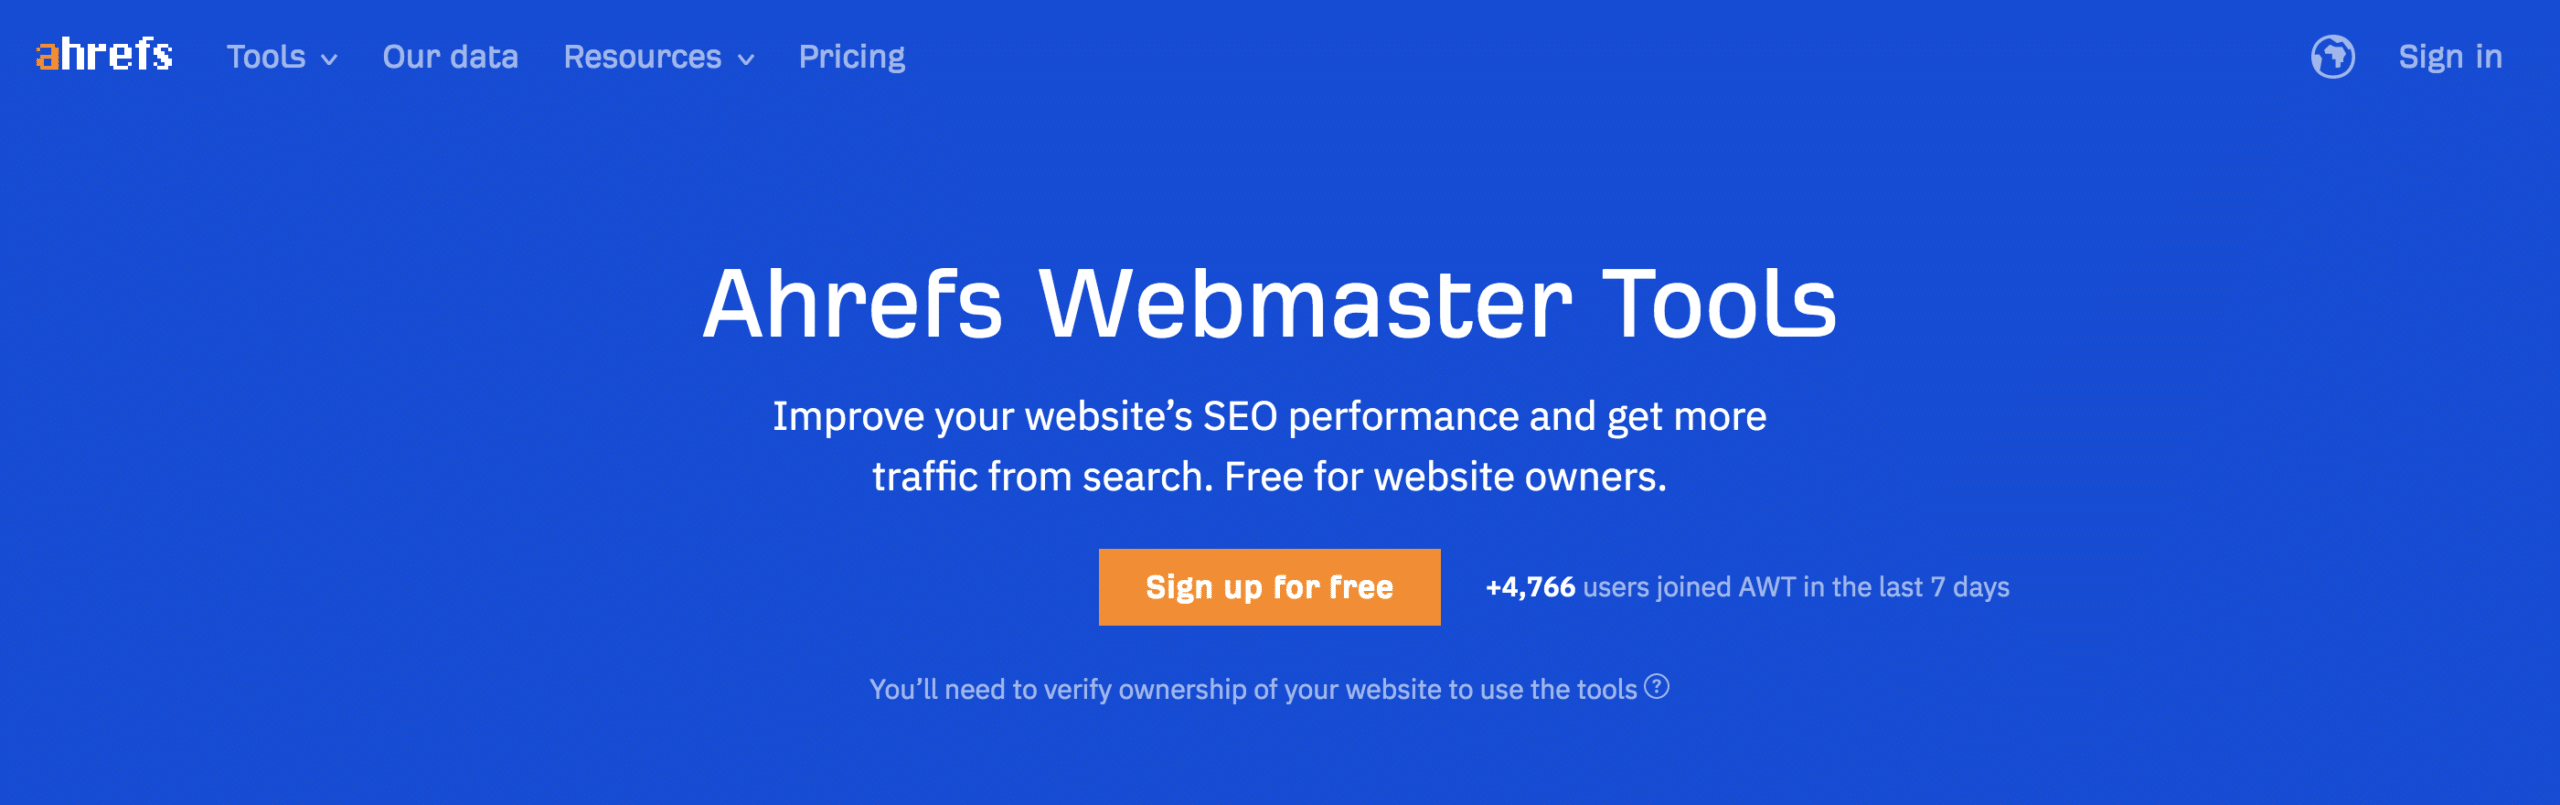 ahrefs webmaster tools homepage to increase domain authority